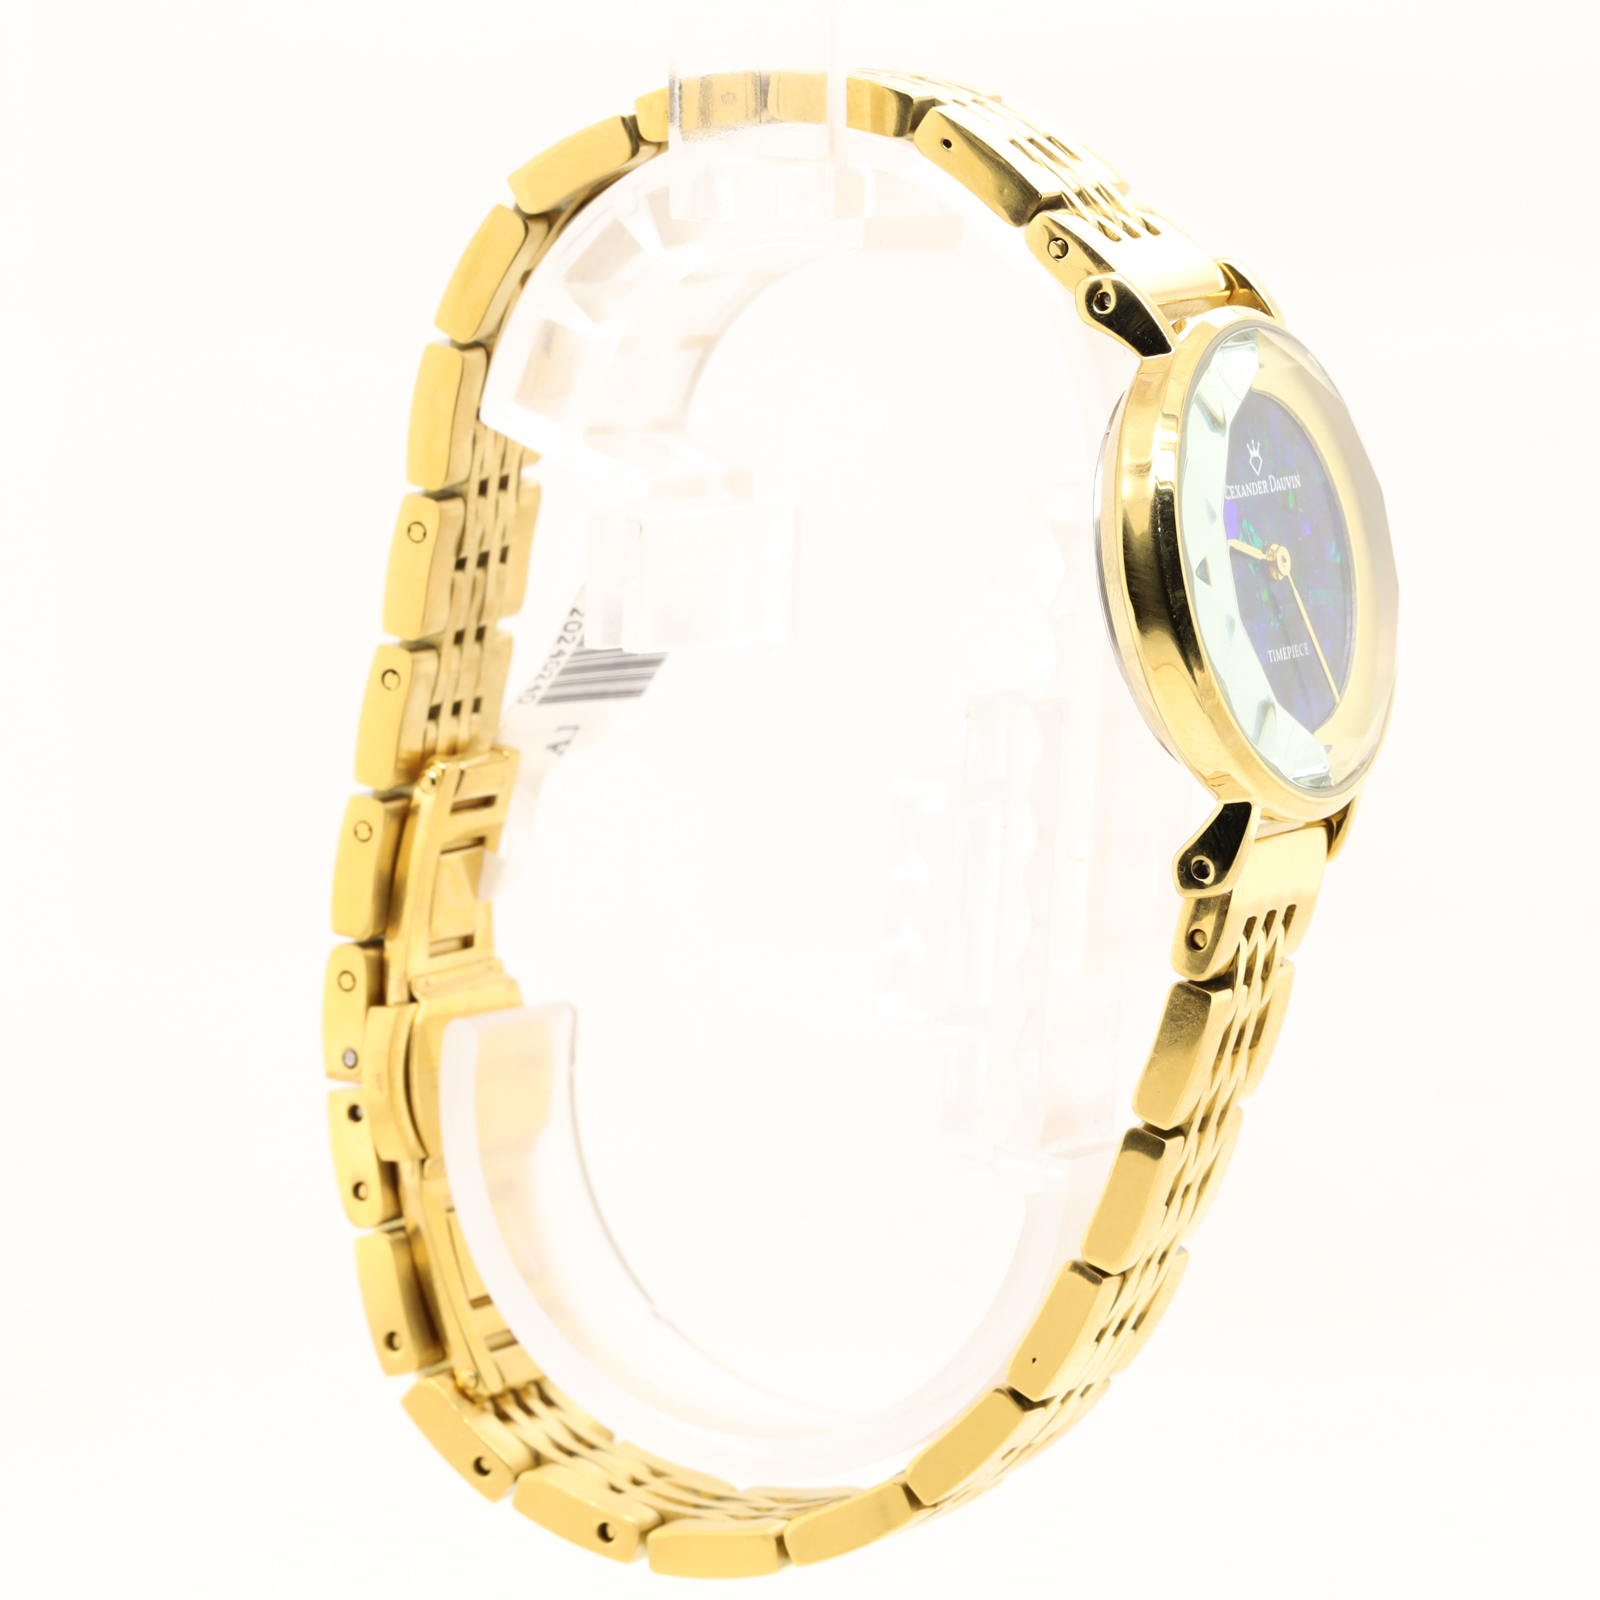 Blue Green Australian Doublet Opal Face Watch on Stainless Steel Gold Plated Band